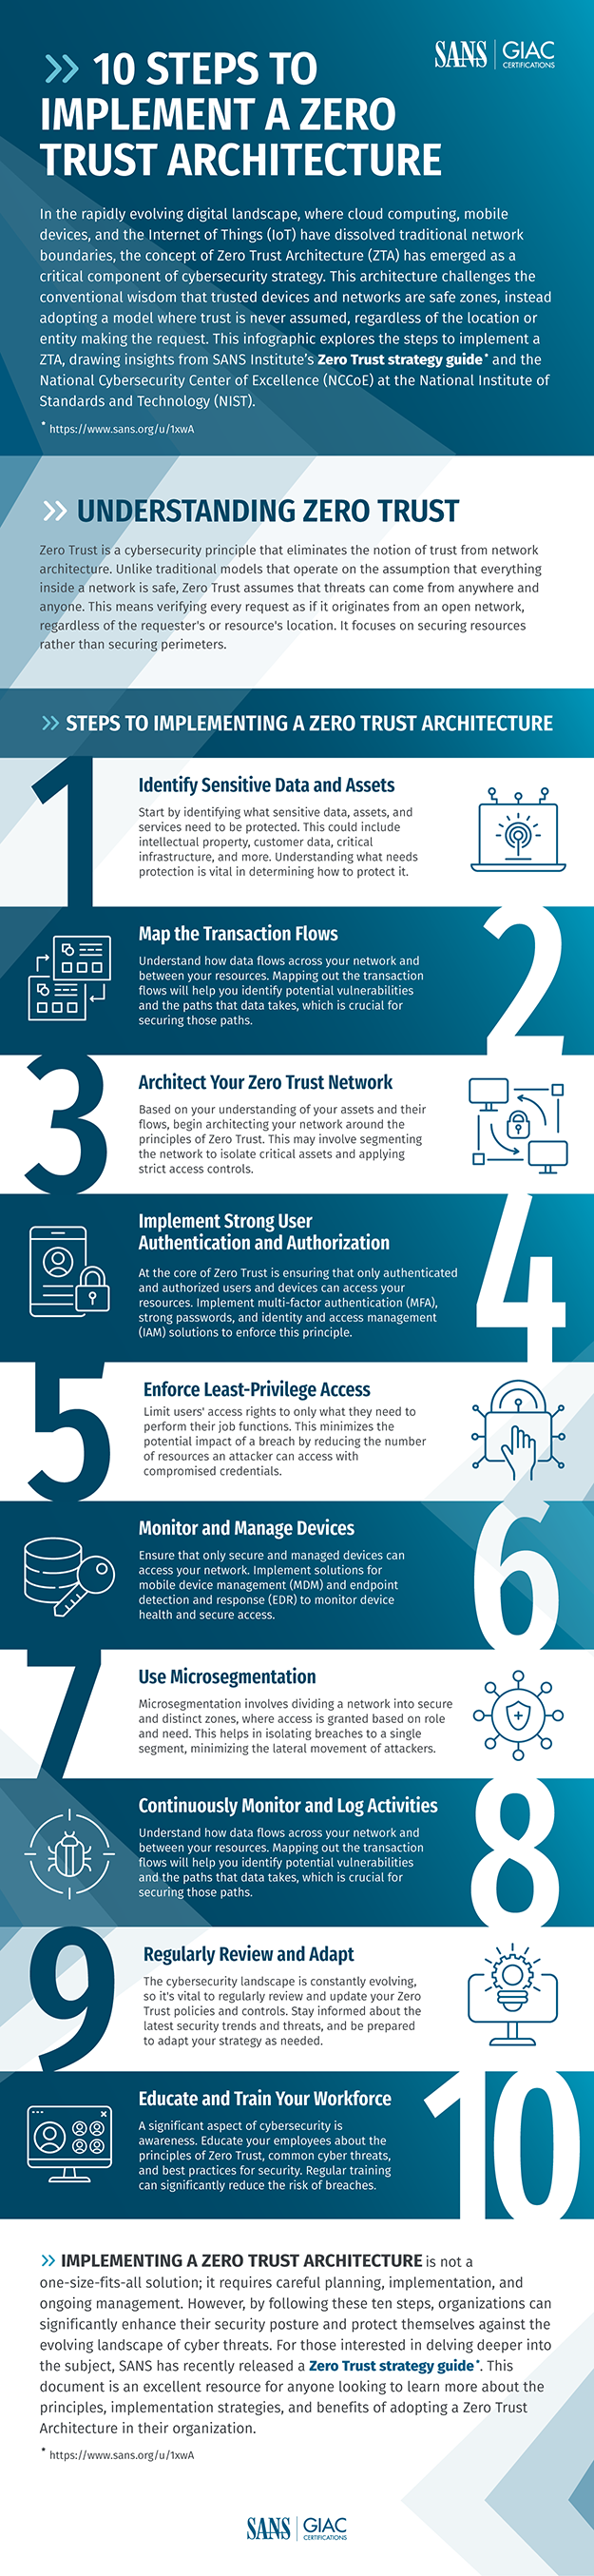 A blog providing an infograhpic on 10 steps to implement a Zero Trust architecture